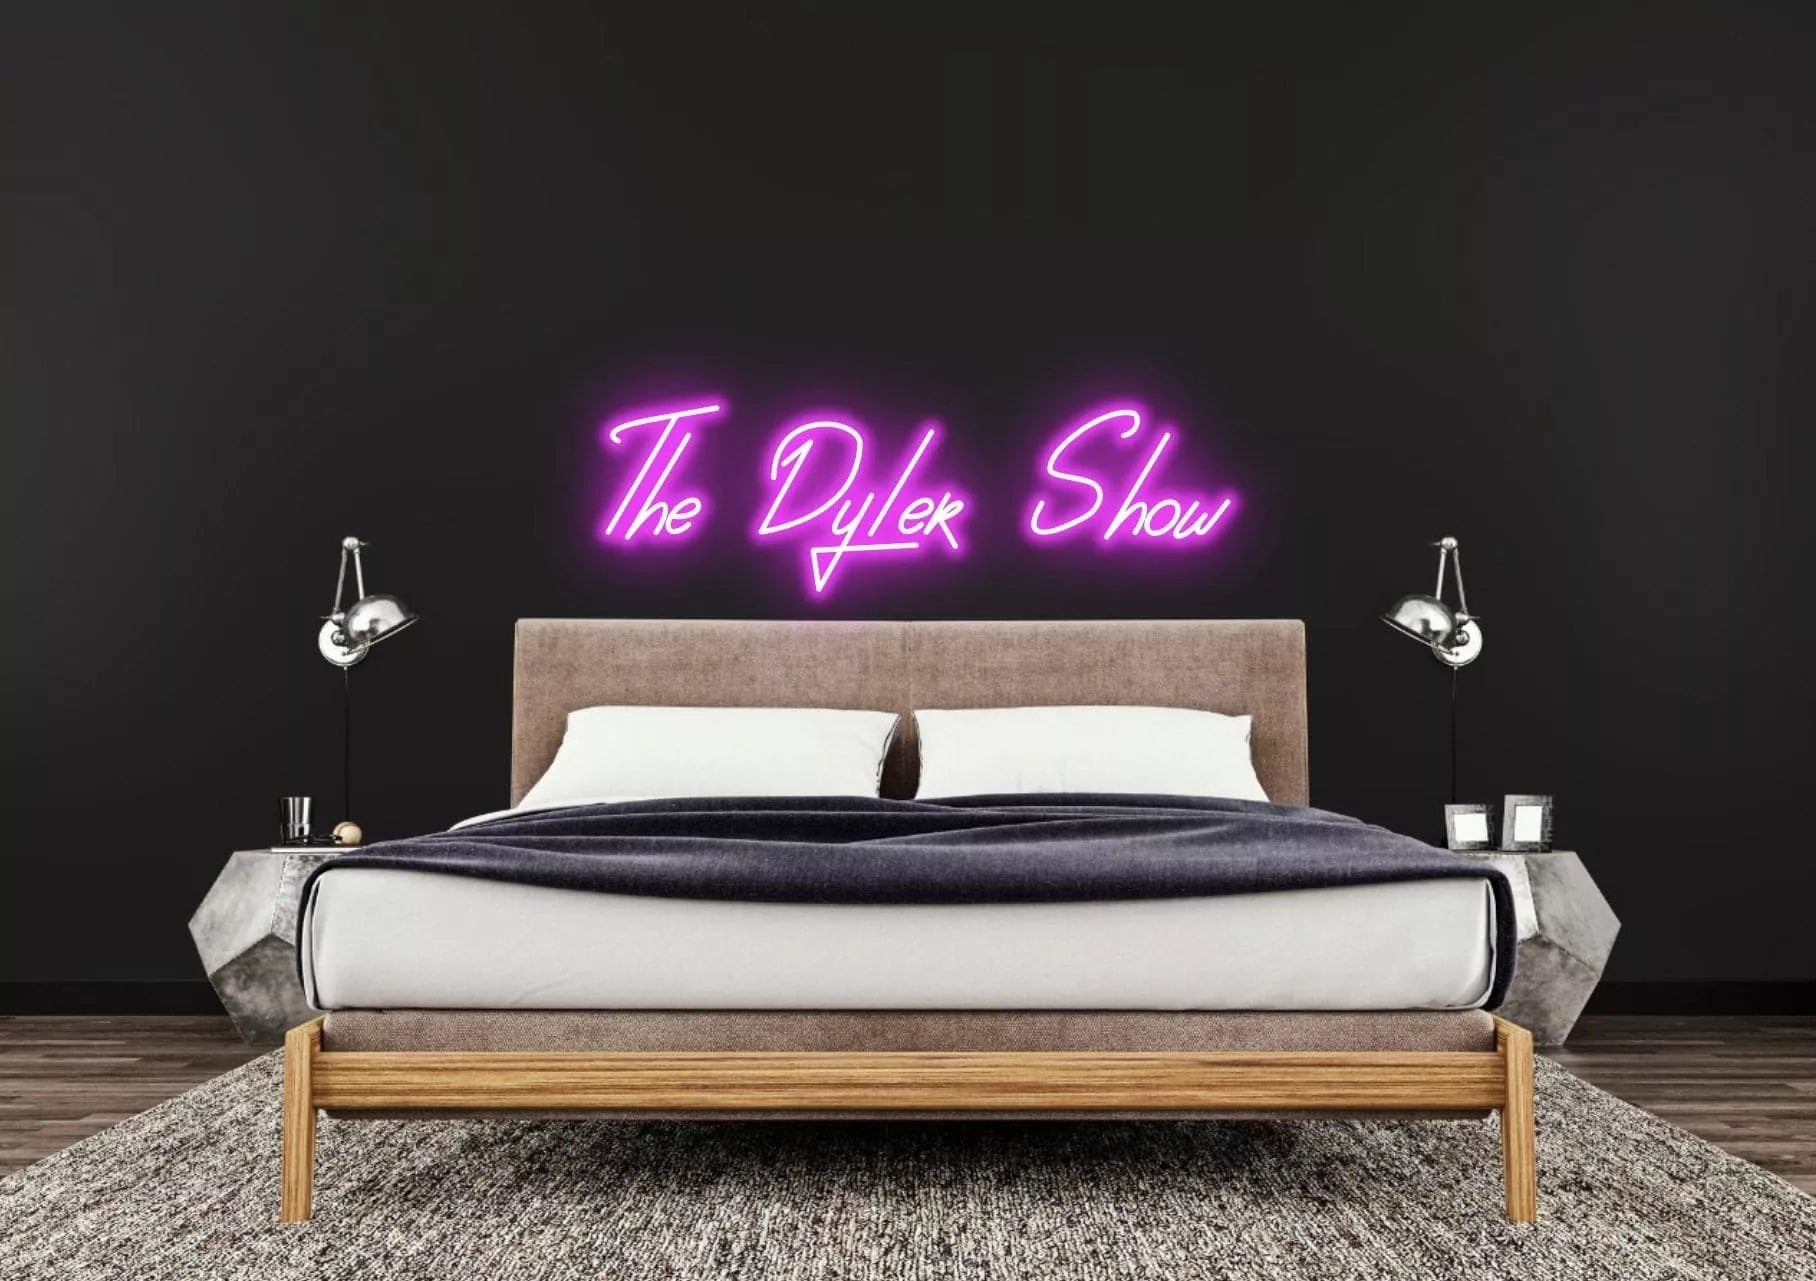 "The Dyler Show" Neon Sign - NeonHub